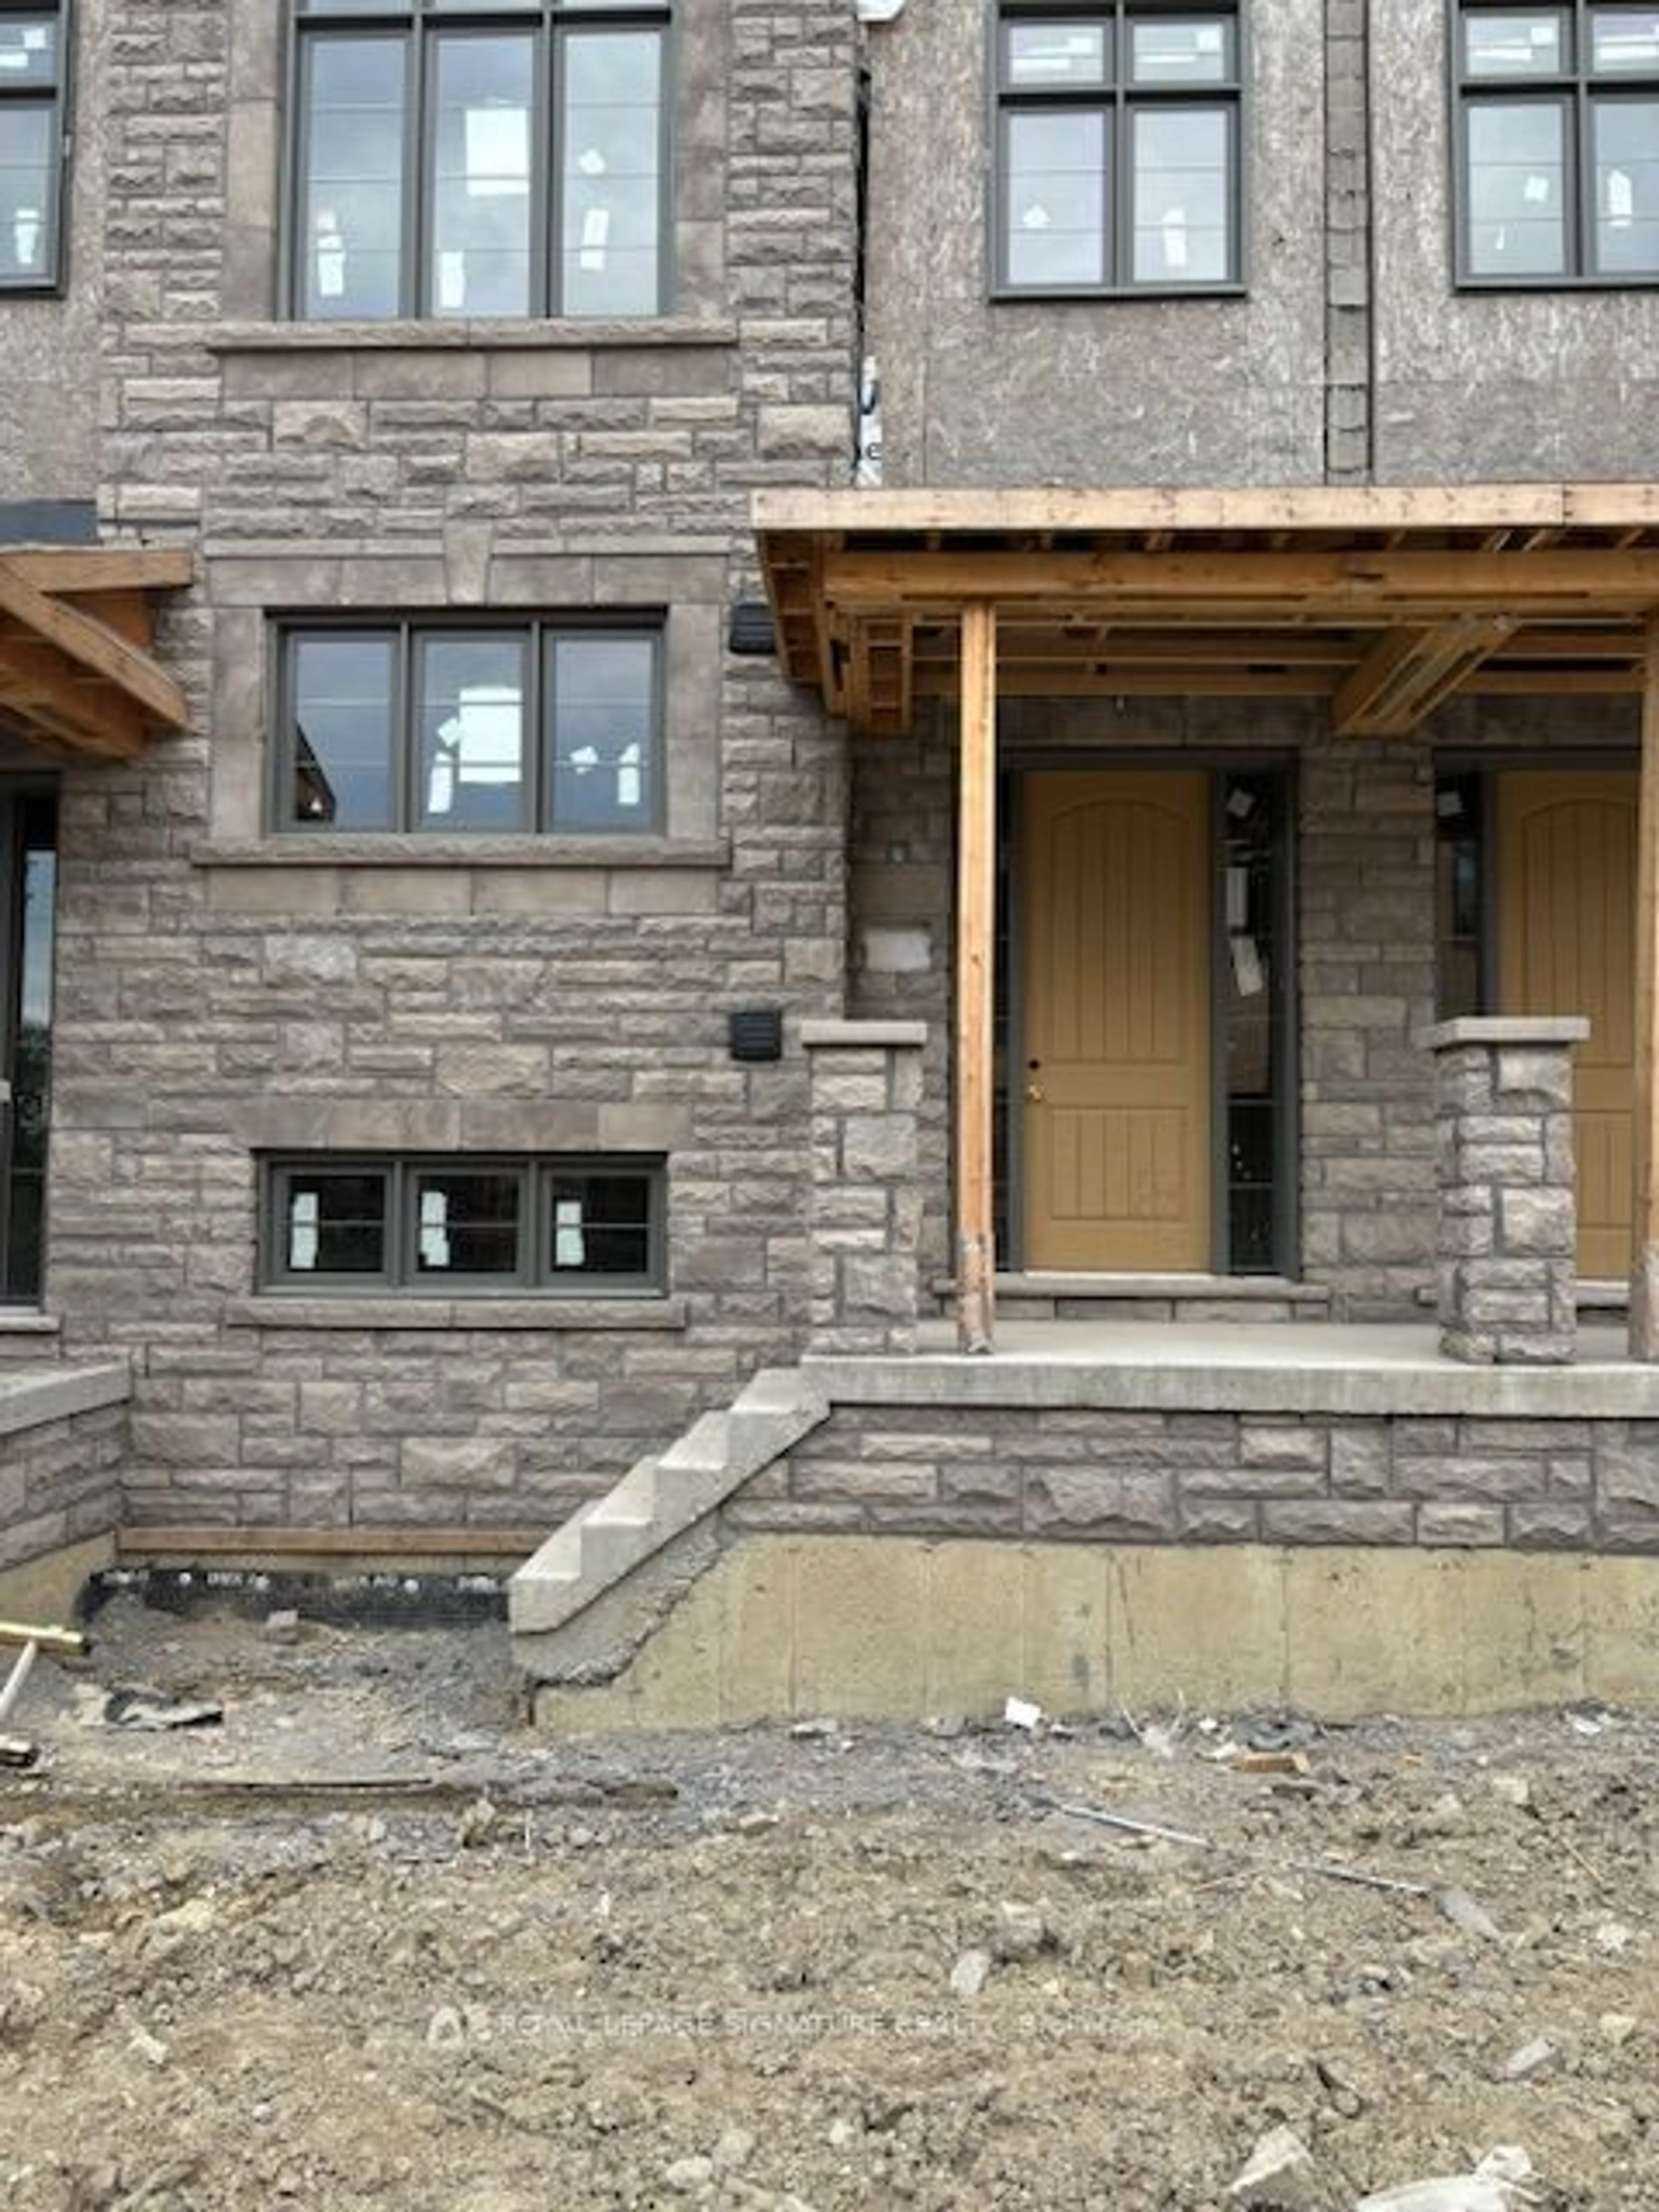 Home with brick exterior material for 18 Gardeners Lane, Markham Ontario L6C 1K4